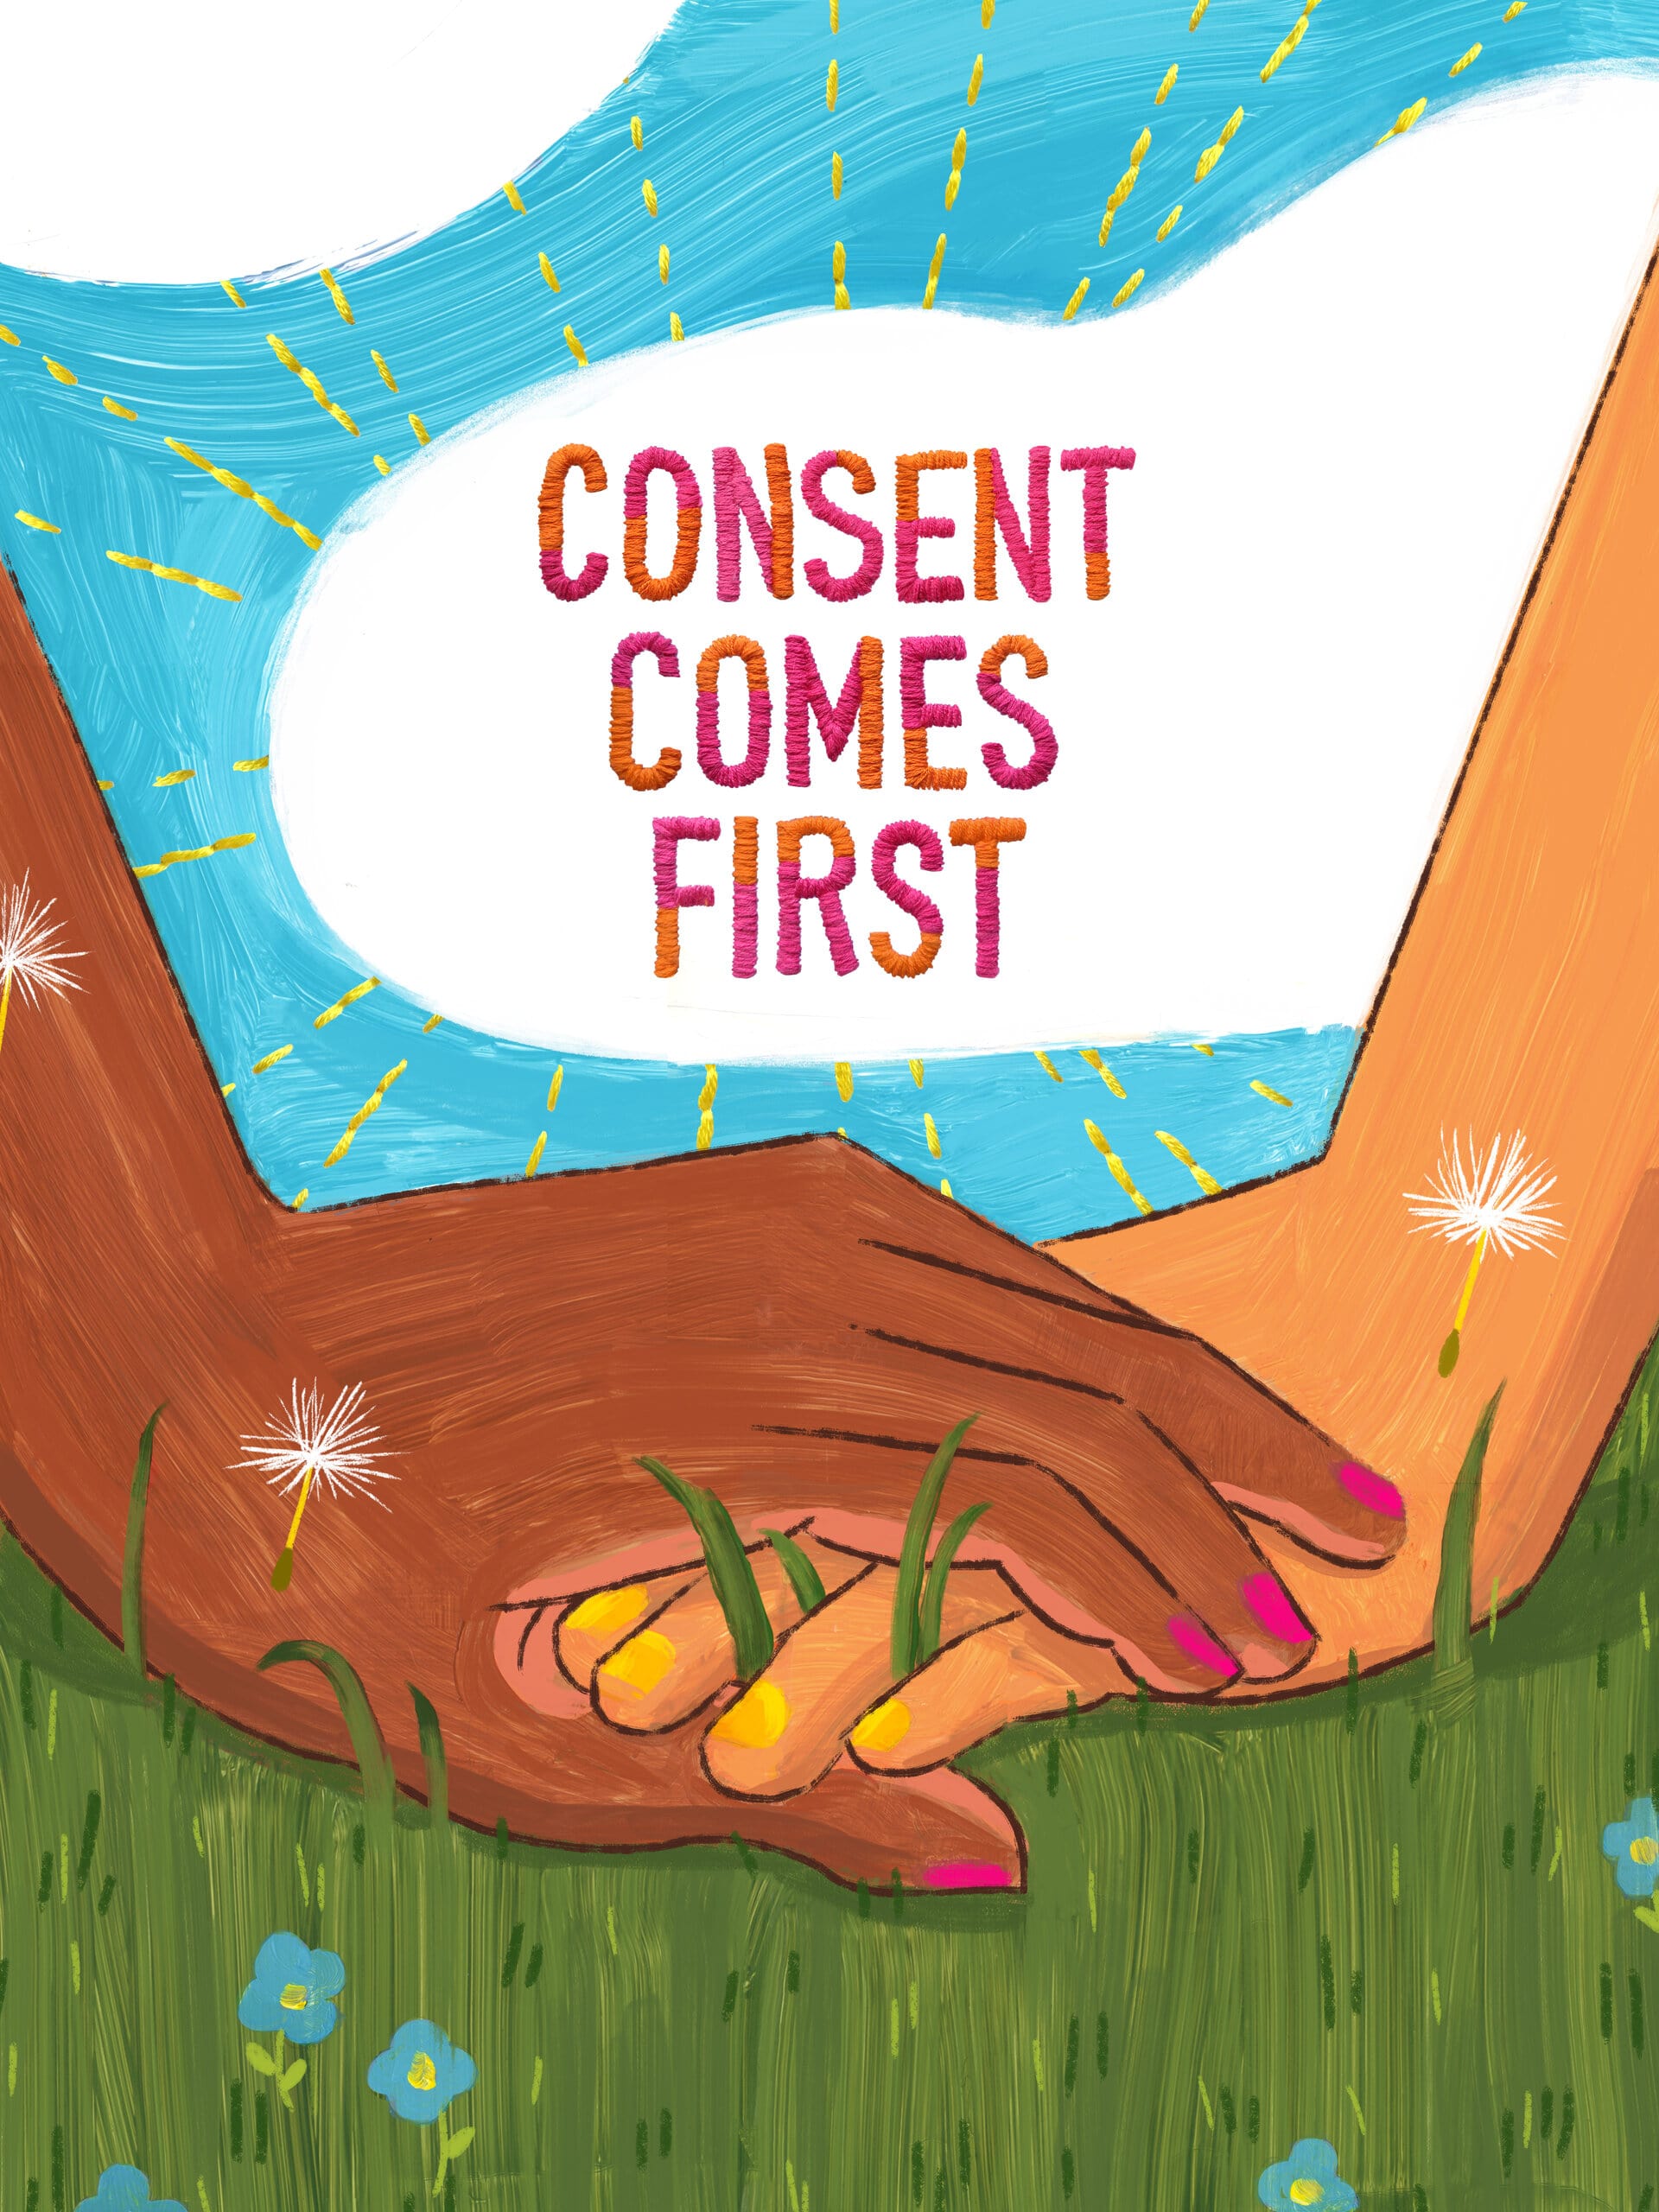 Graphic of two hands holding each other on grass with the text "consent comes first" above.